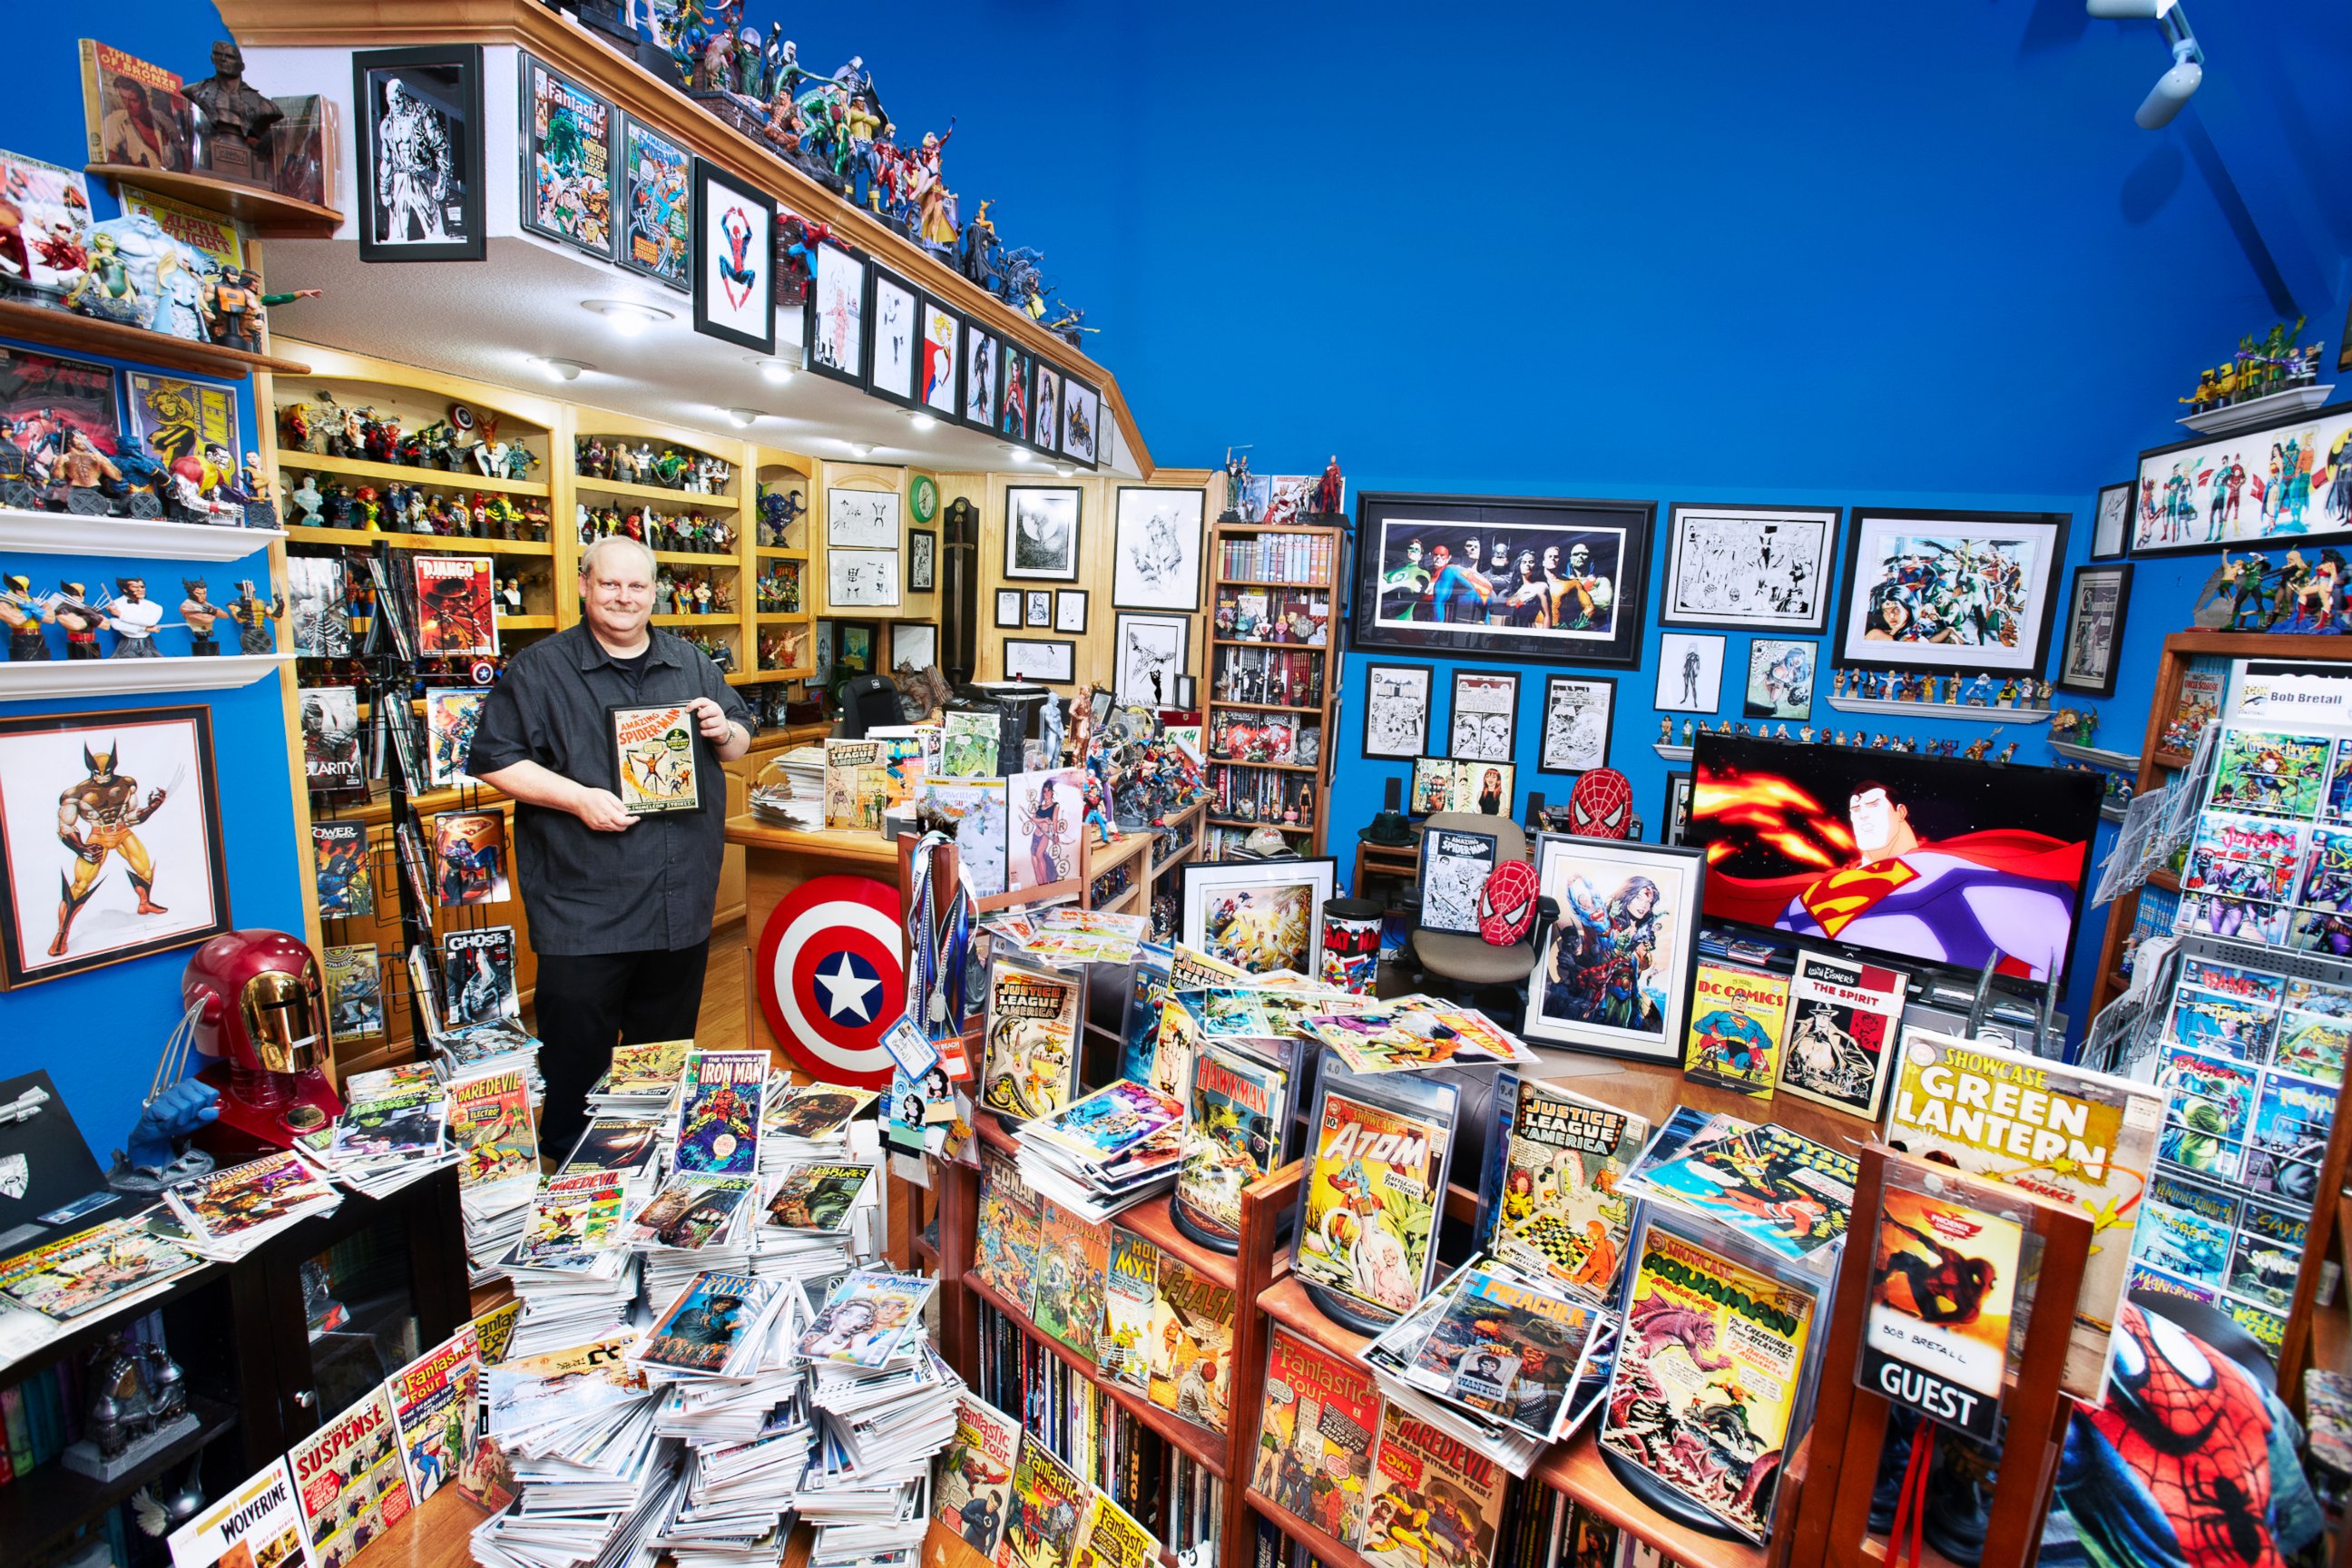 PHOTO: The largest collection of comic books includes 94,268 unique items and is owned by Bob Bretall of Mission Viejo, Calif.